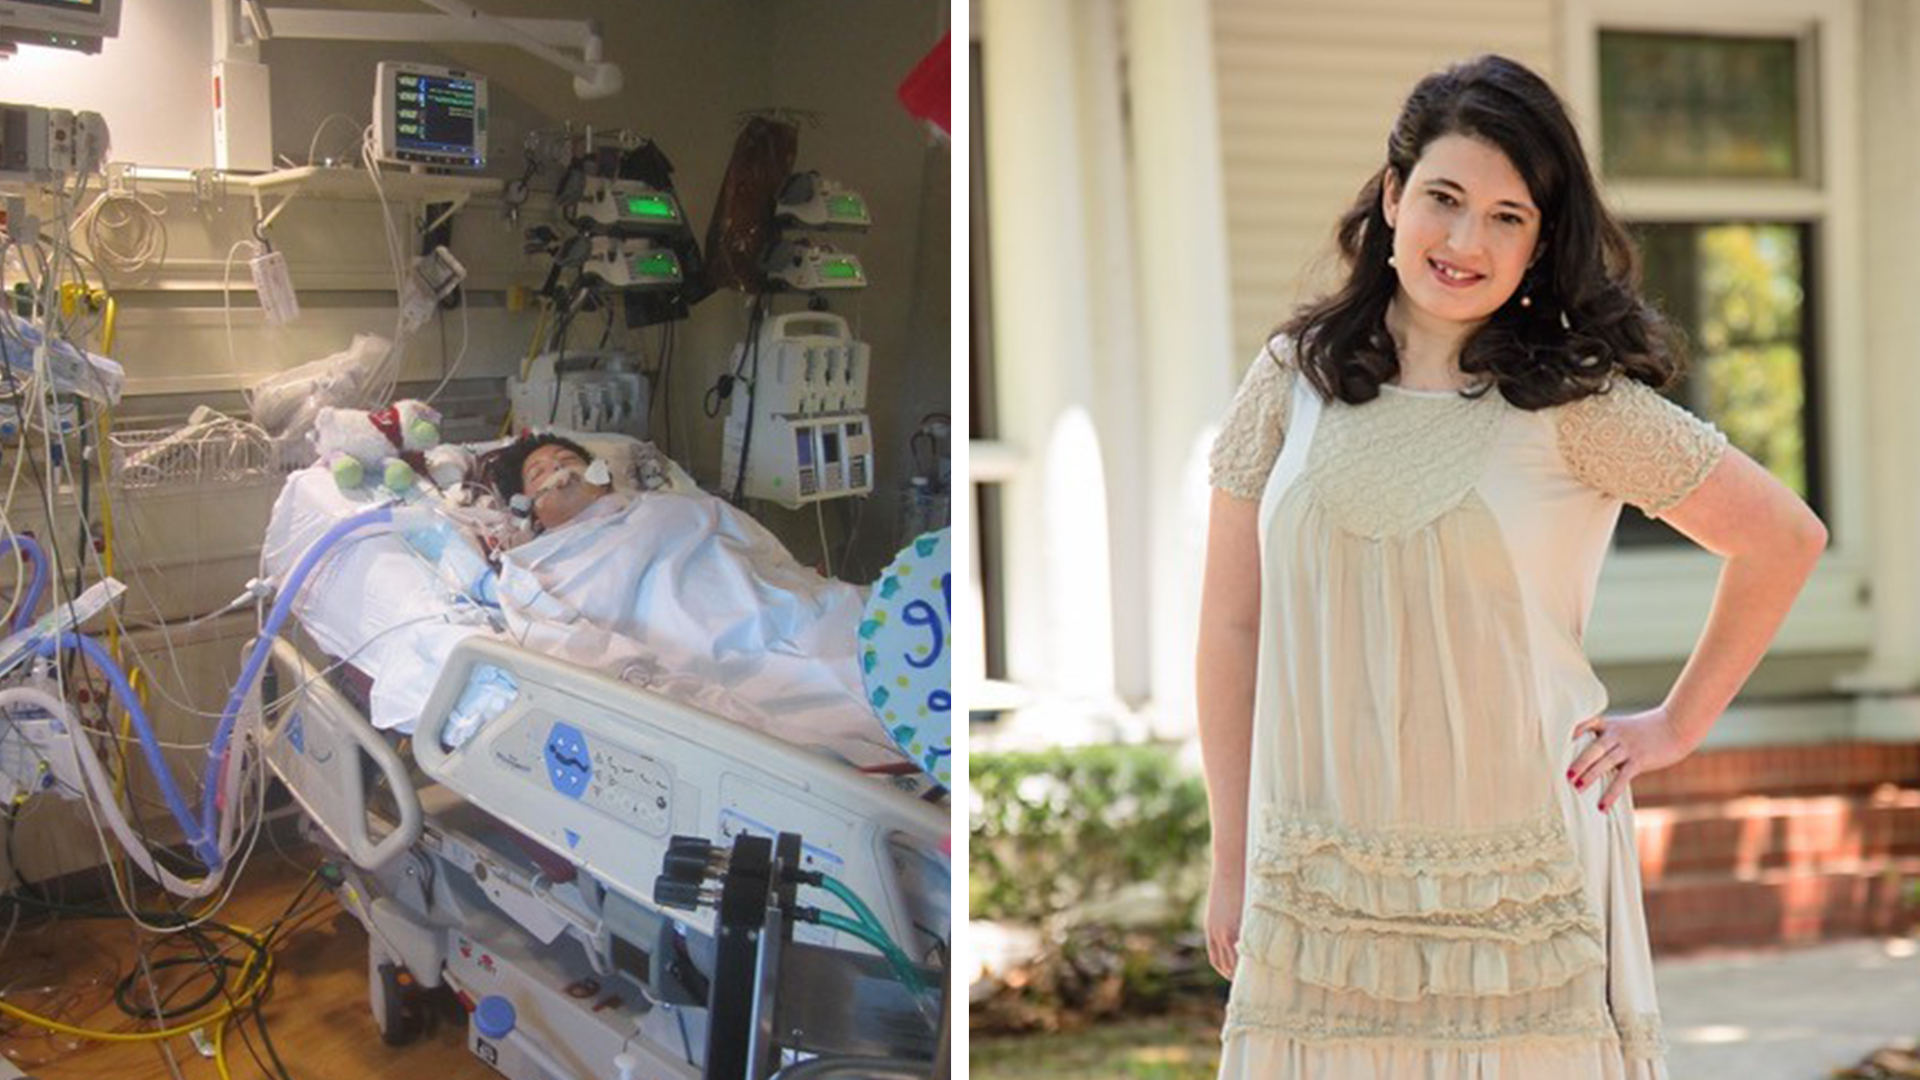 For patients like Kinsey Morgan, an amazing machine called ECMO can provide lifesaving care. See why this machine – and the team behind it at Levine Children's Hospital – are receiving global recognition.